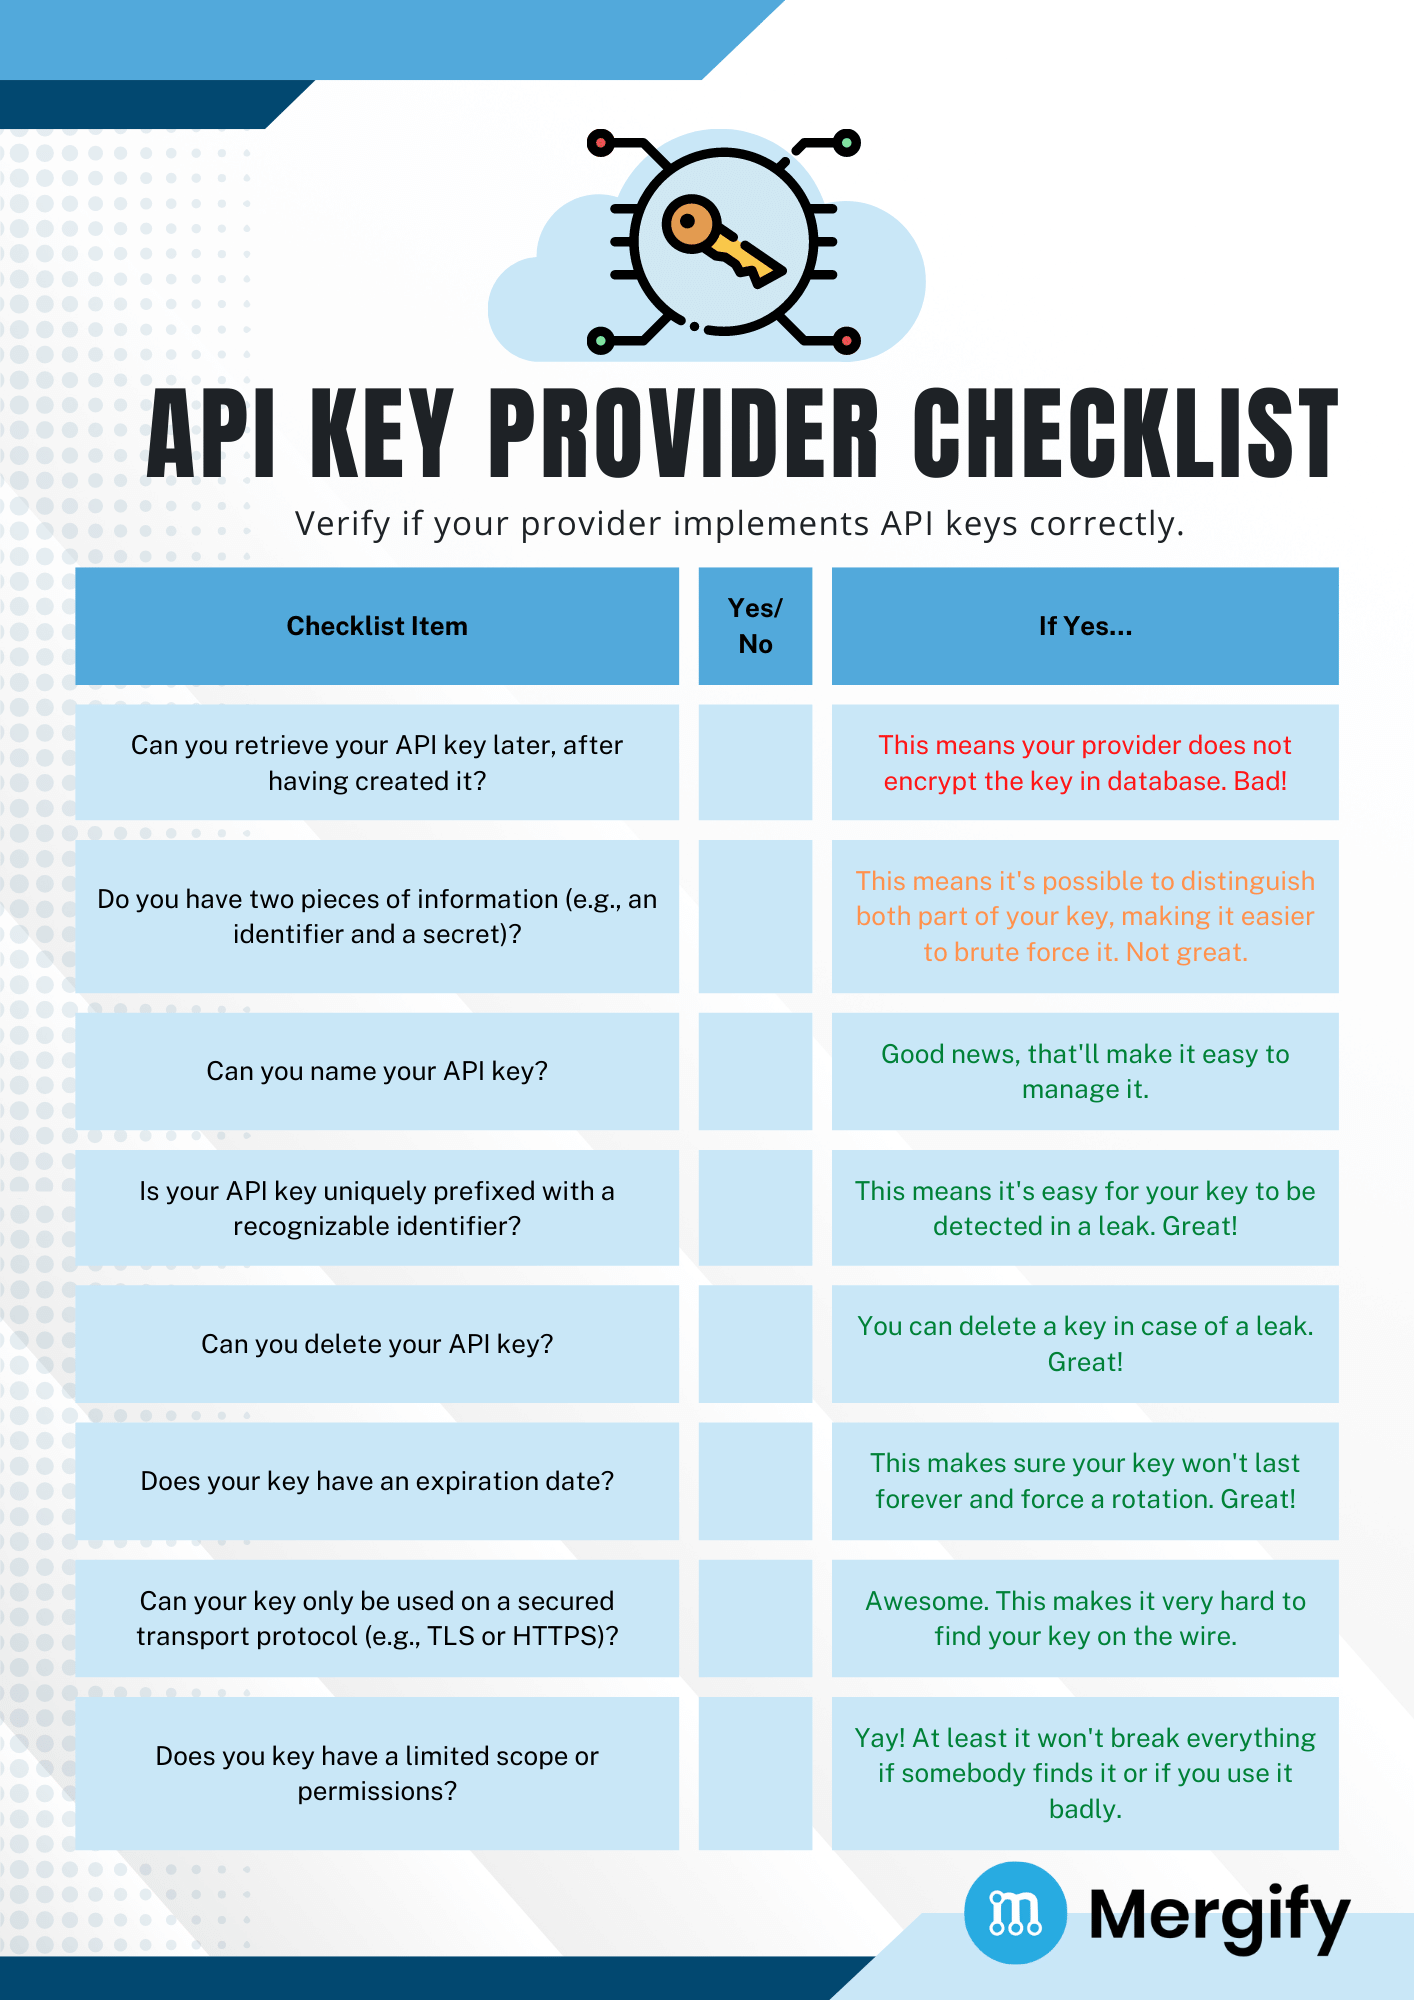 Is an API key just a password?